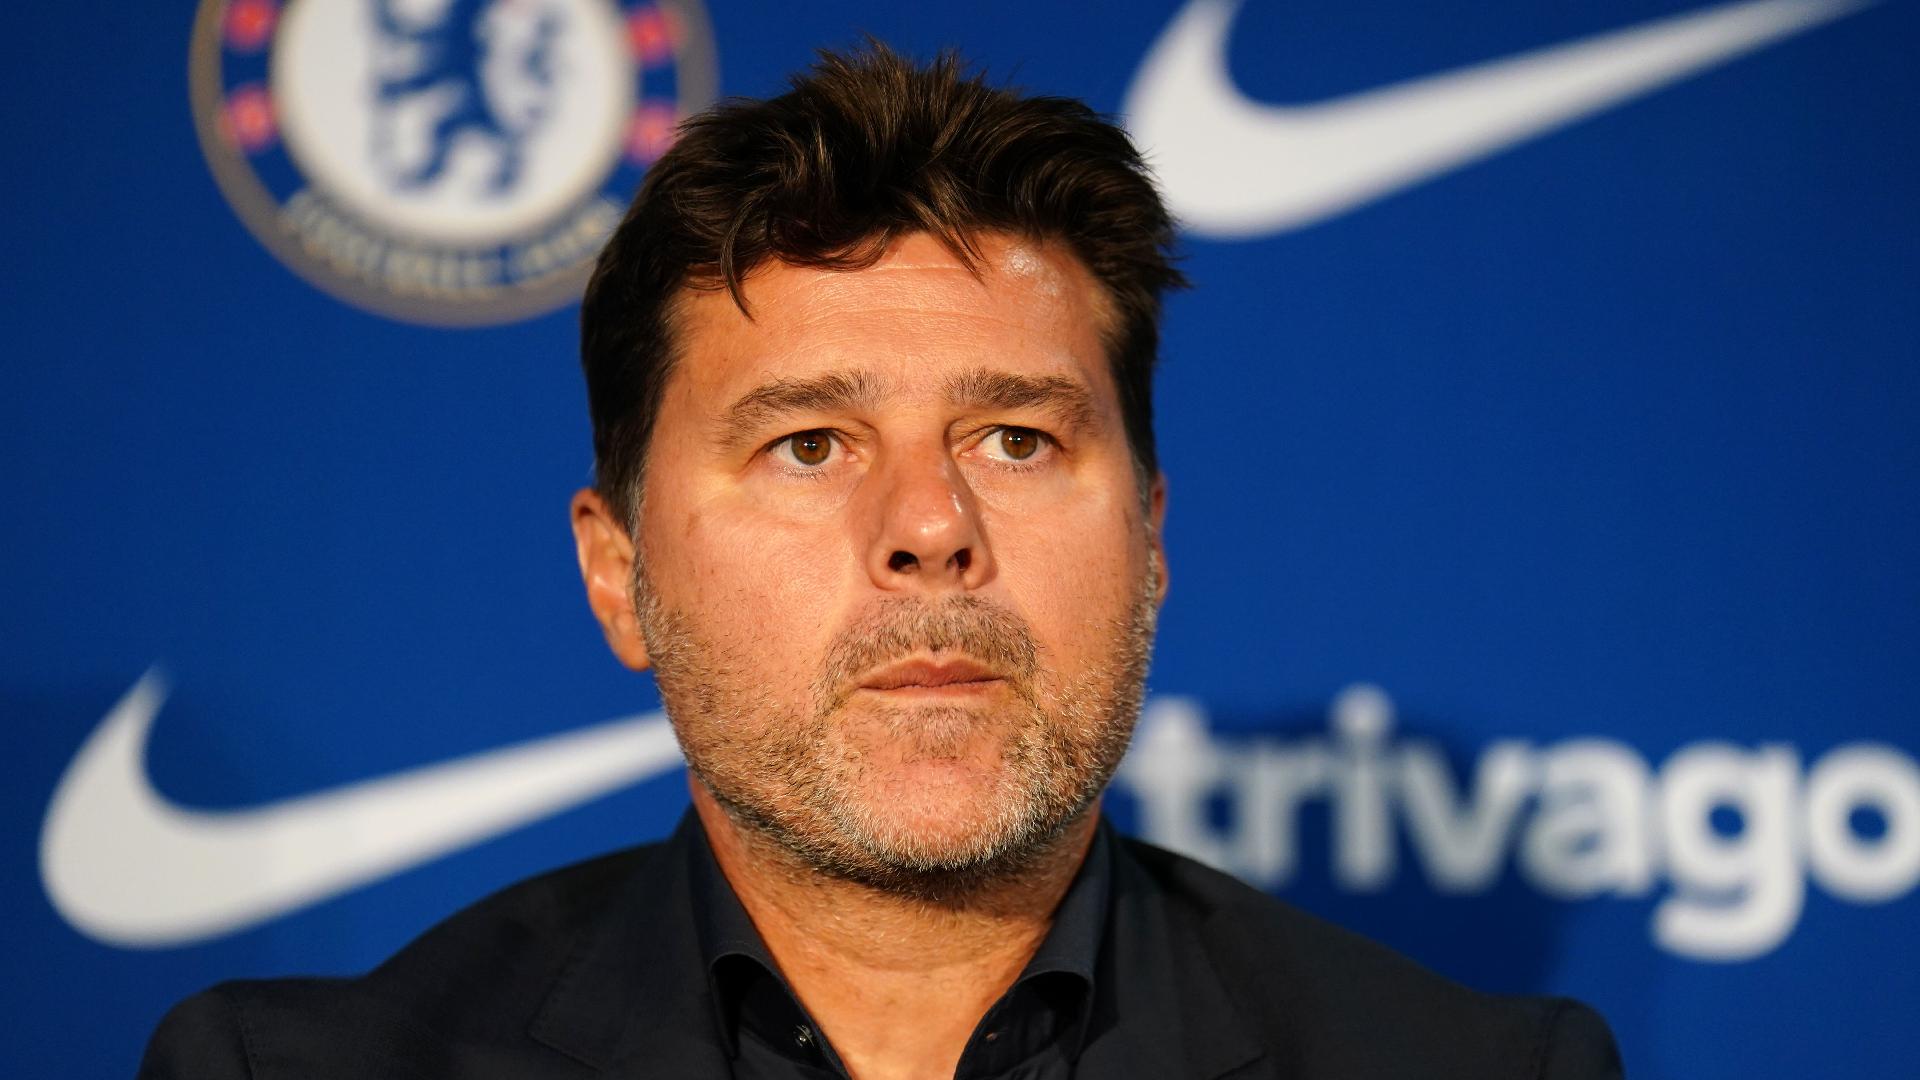 What has gone wrong at Chelsea after billion-pound transfer spree?